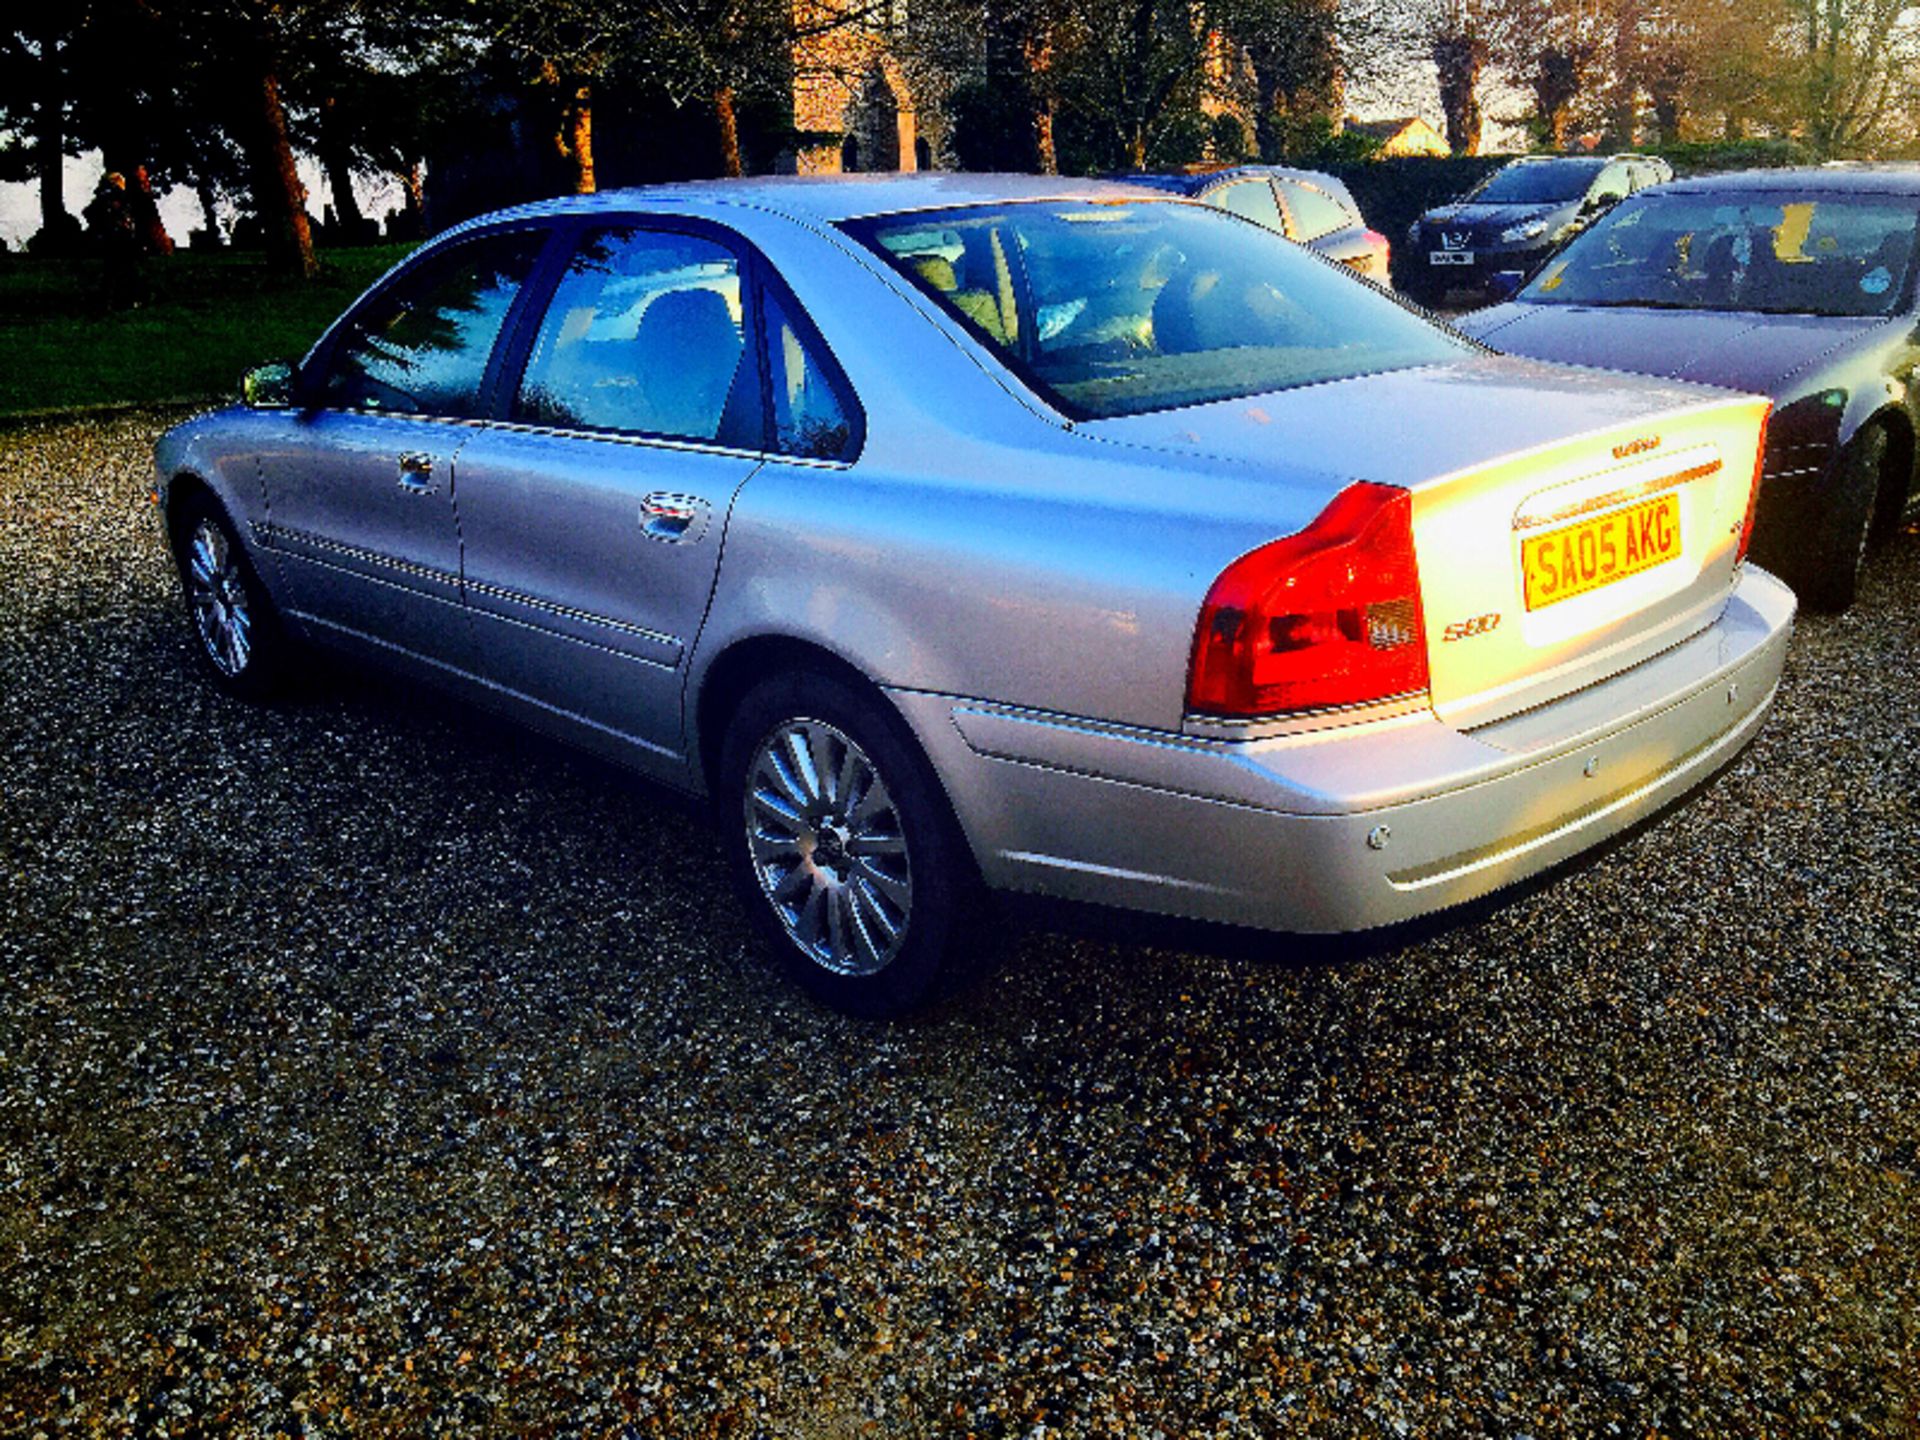 (On Sale) VOLVO S80 SE 2.4 D5 AUTO 2005(05) REG**METALLIC SILVER**A/C*CLIMATE CONTROL*FULL LEATHER* - Image 4 of 17